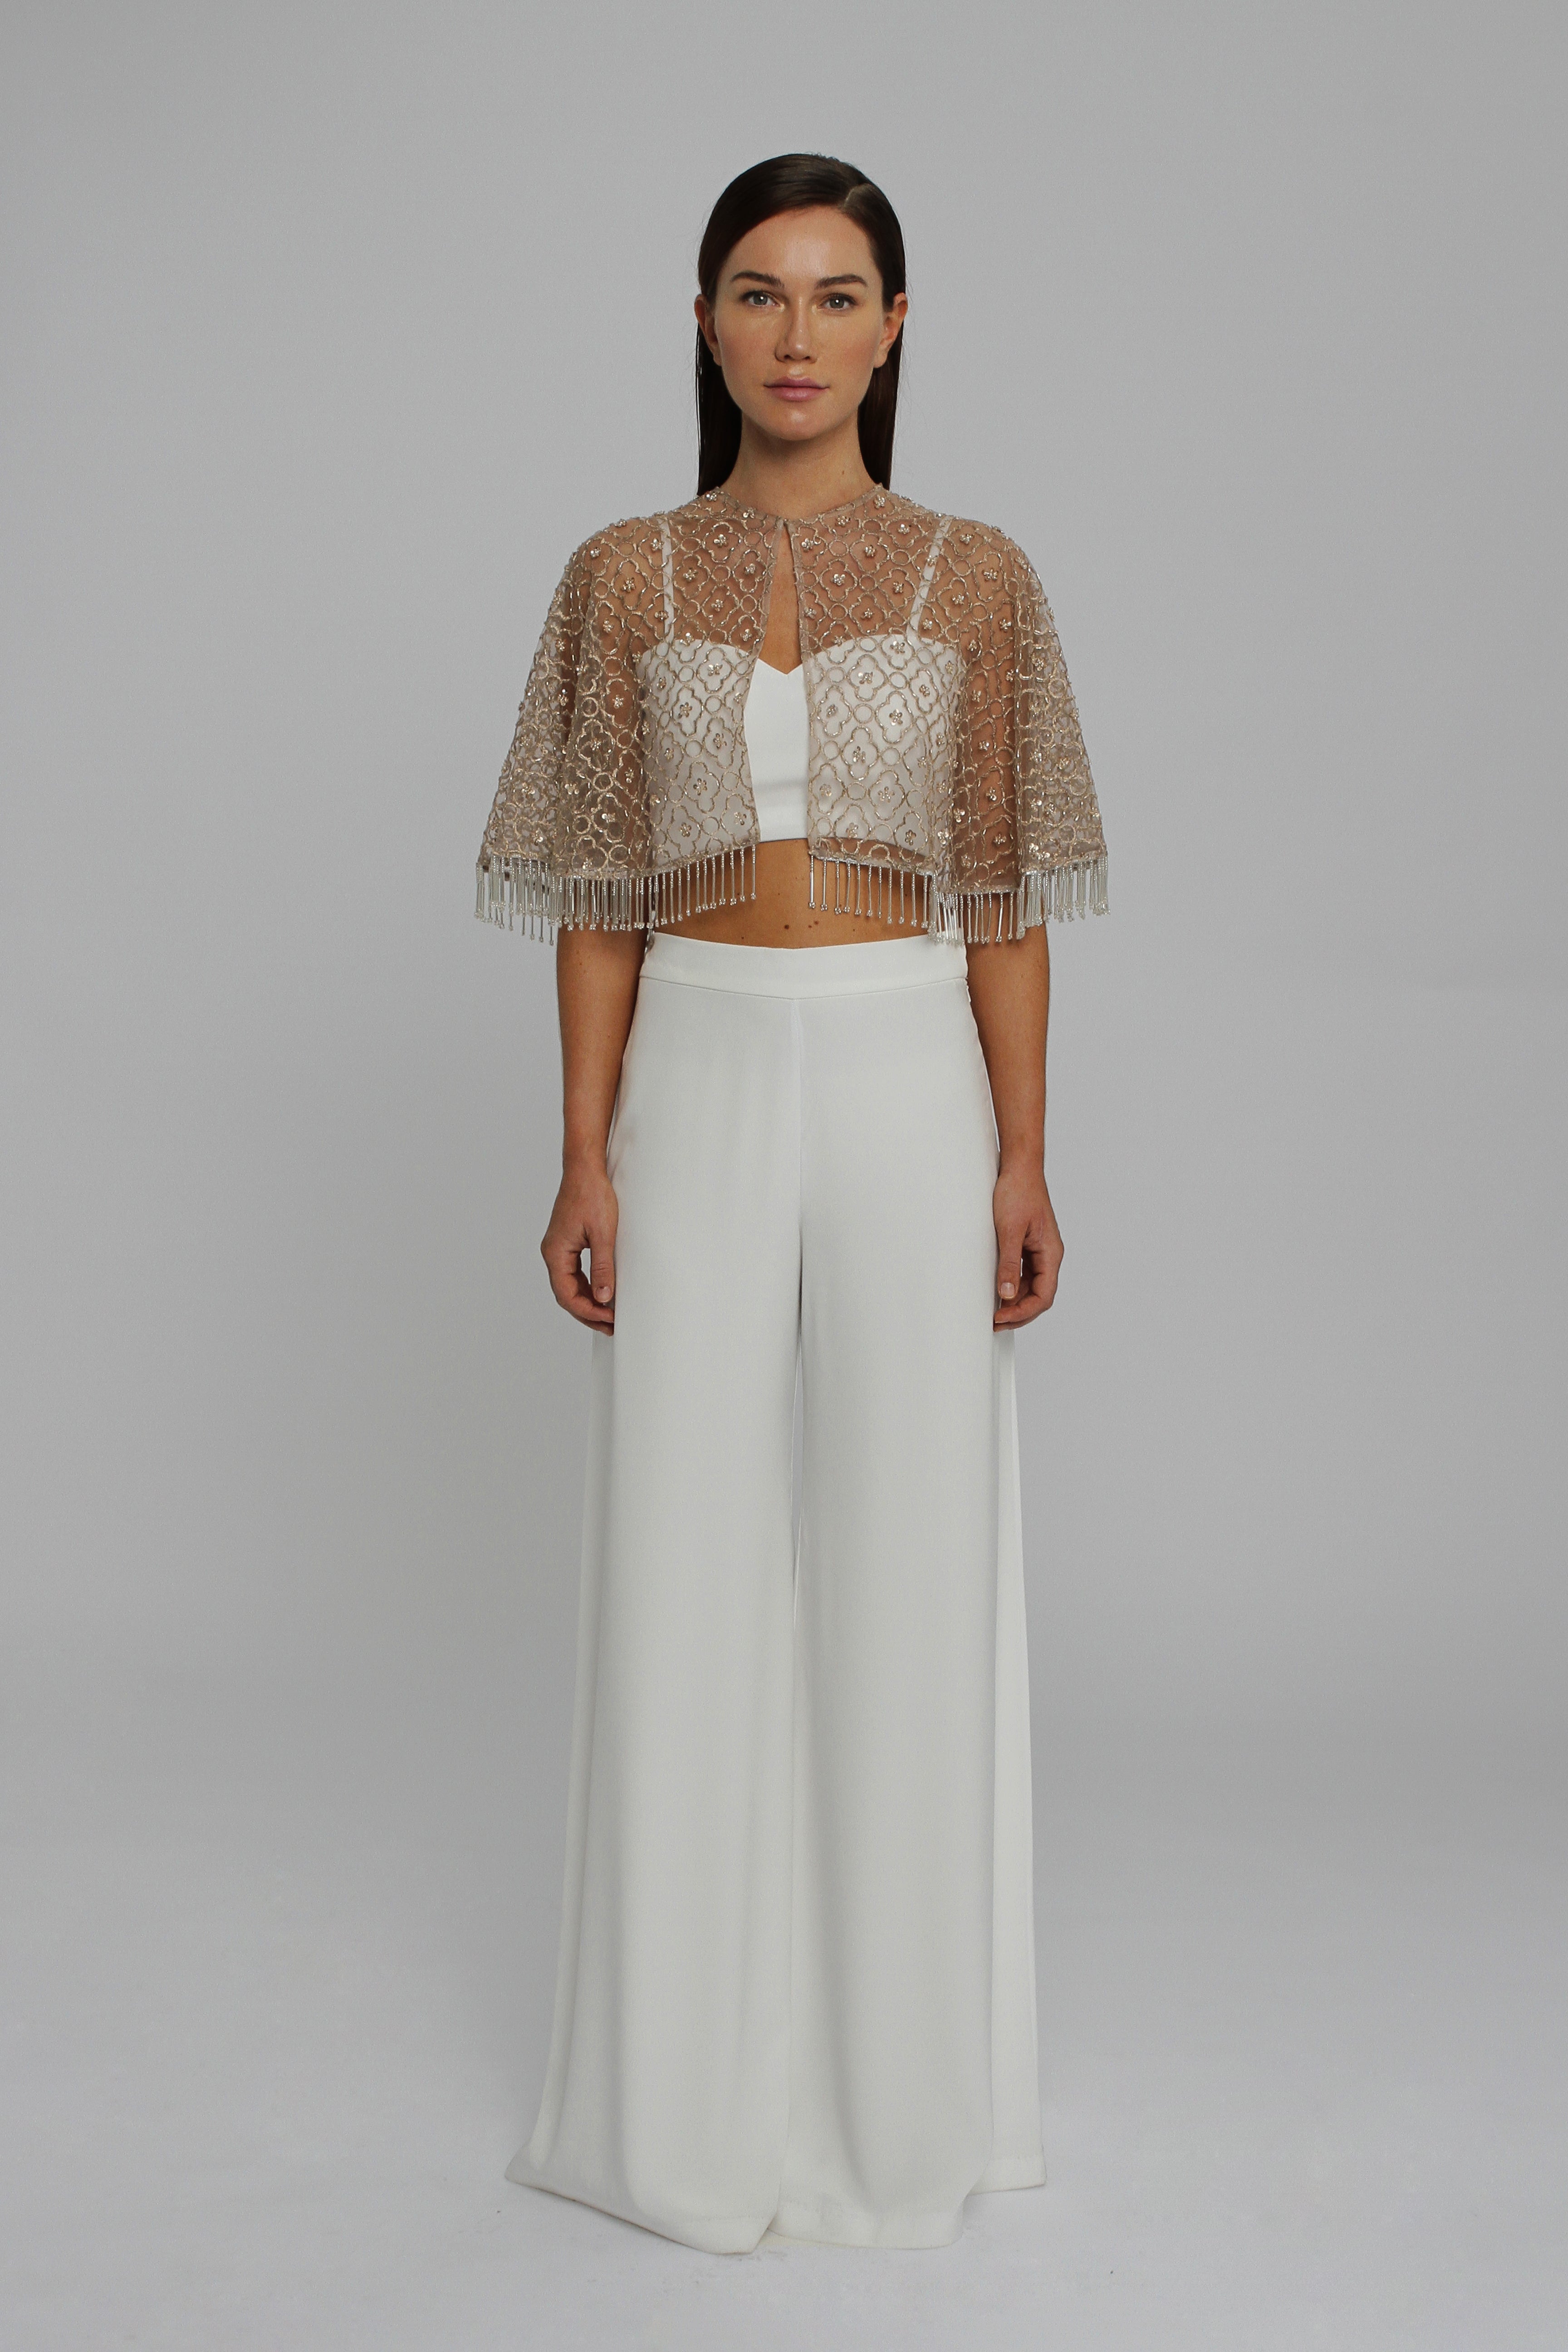 Classic White High Waisted Palazzo UME London Bolero Crop Top Evening Outfit